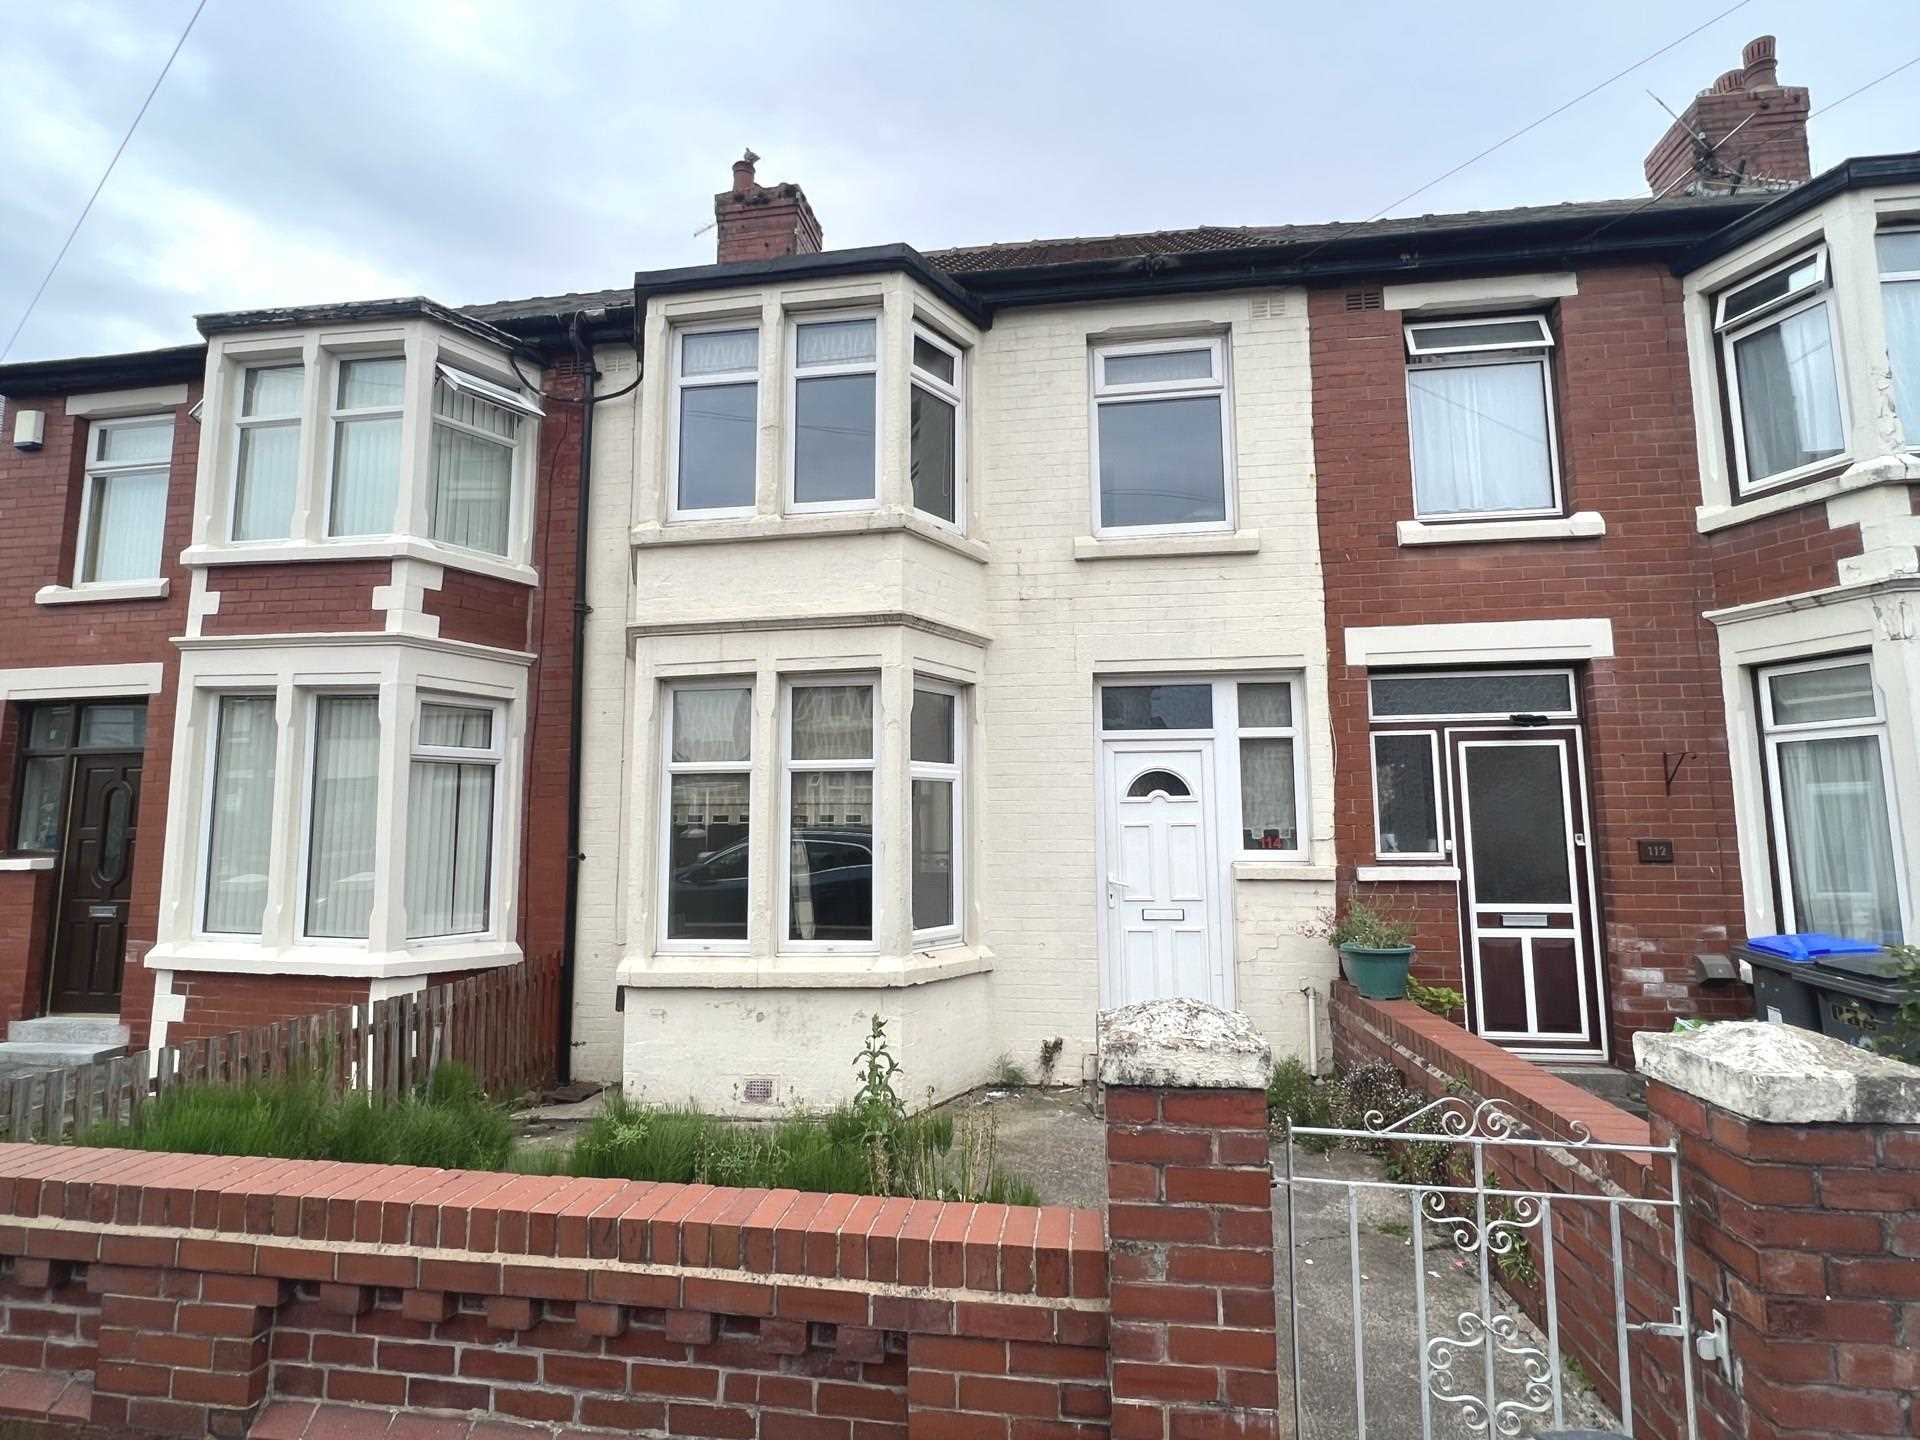 3 bed House (unspecified) for rent in Blackpool. From Christie King Estate Agents